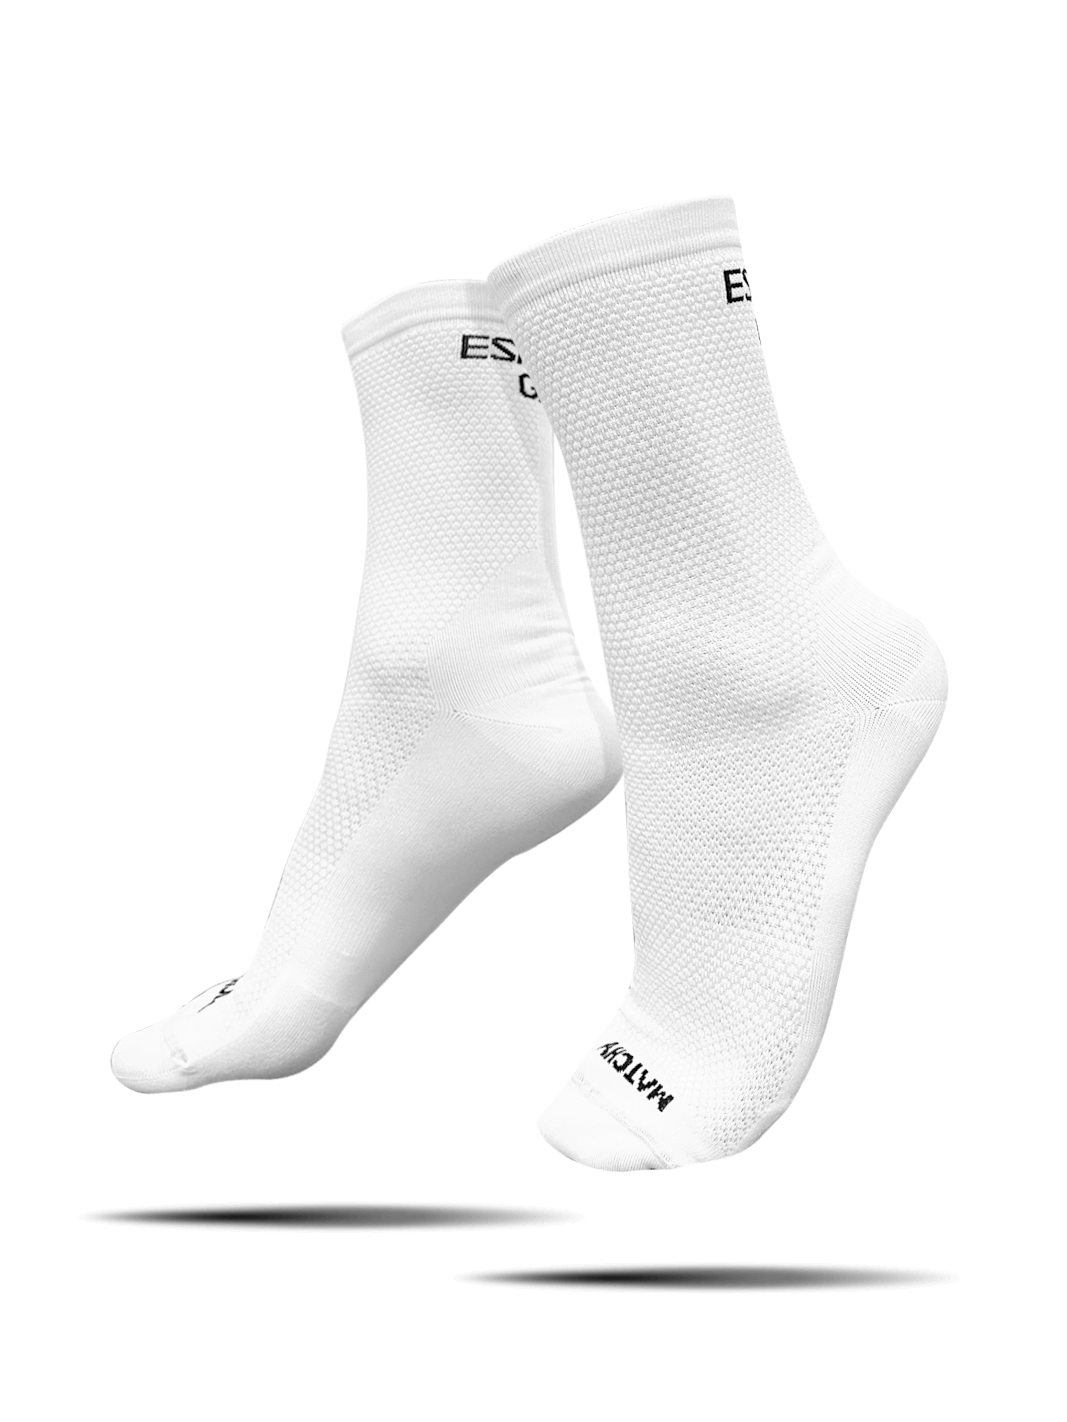 Chaussettes Blanches - Espresso Gang